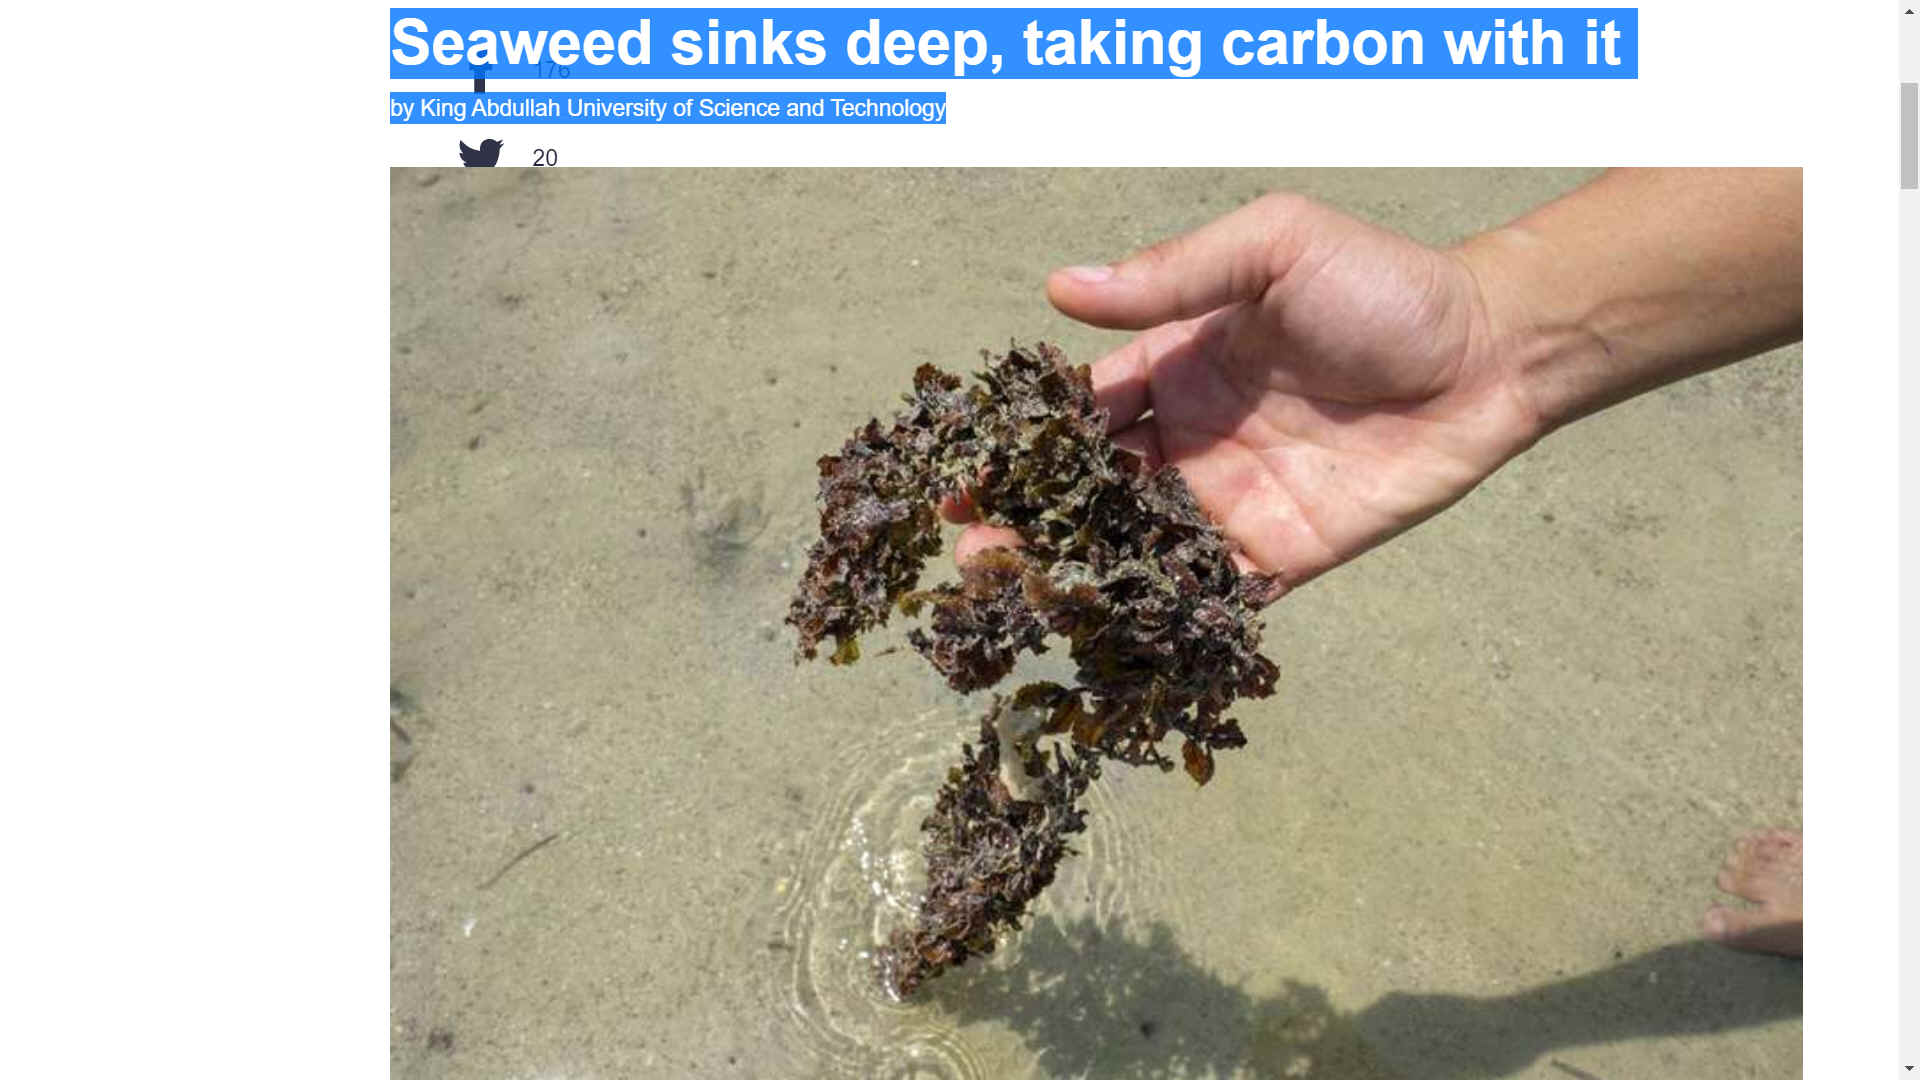 Seaweed sinks deep taking carbon dioxide with it